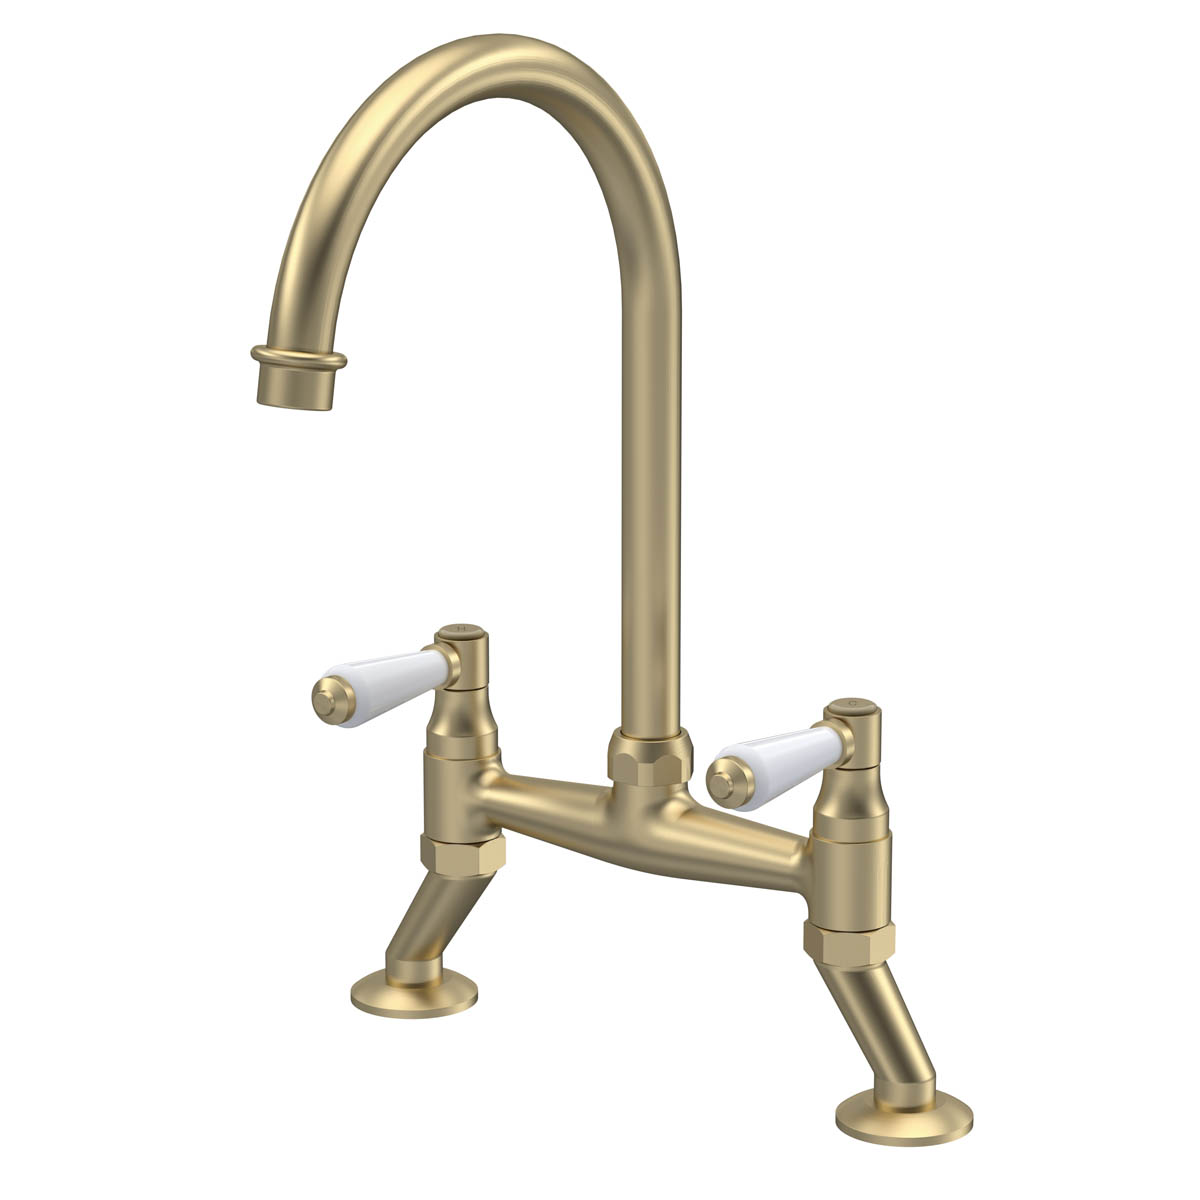 Nuie Bridge Traditional Mono Kitchen Tap with Topaz Lever - Brushed Brass (20375)